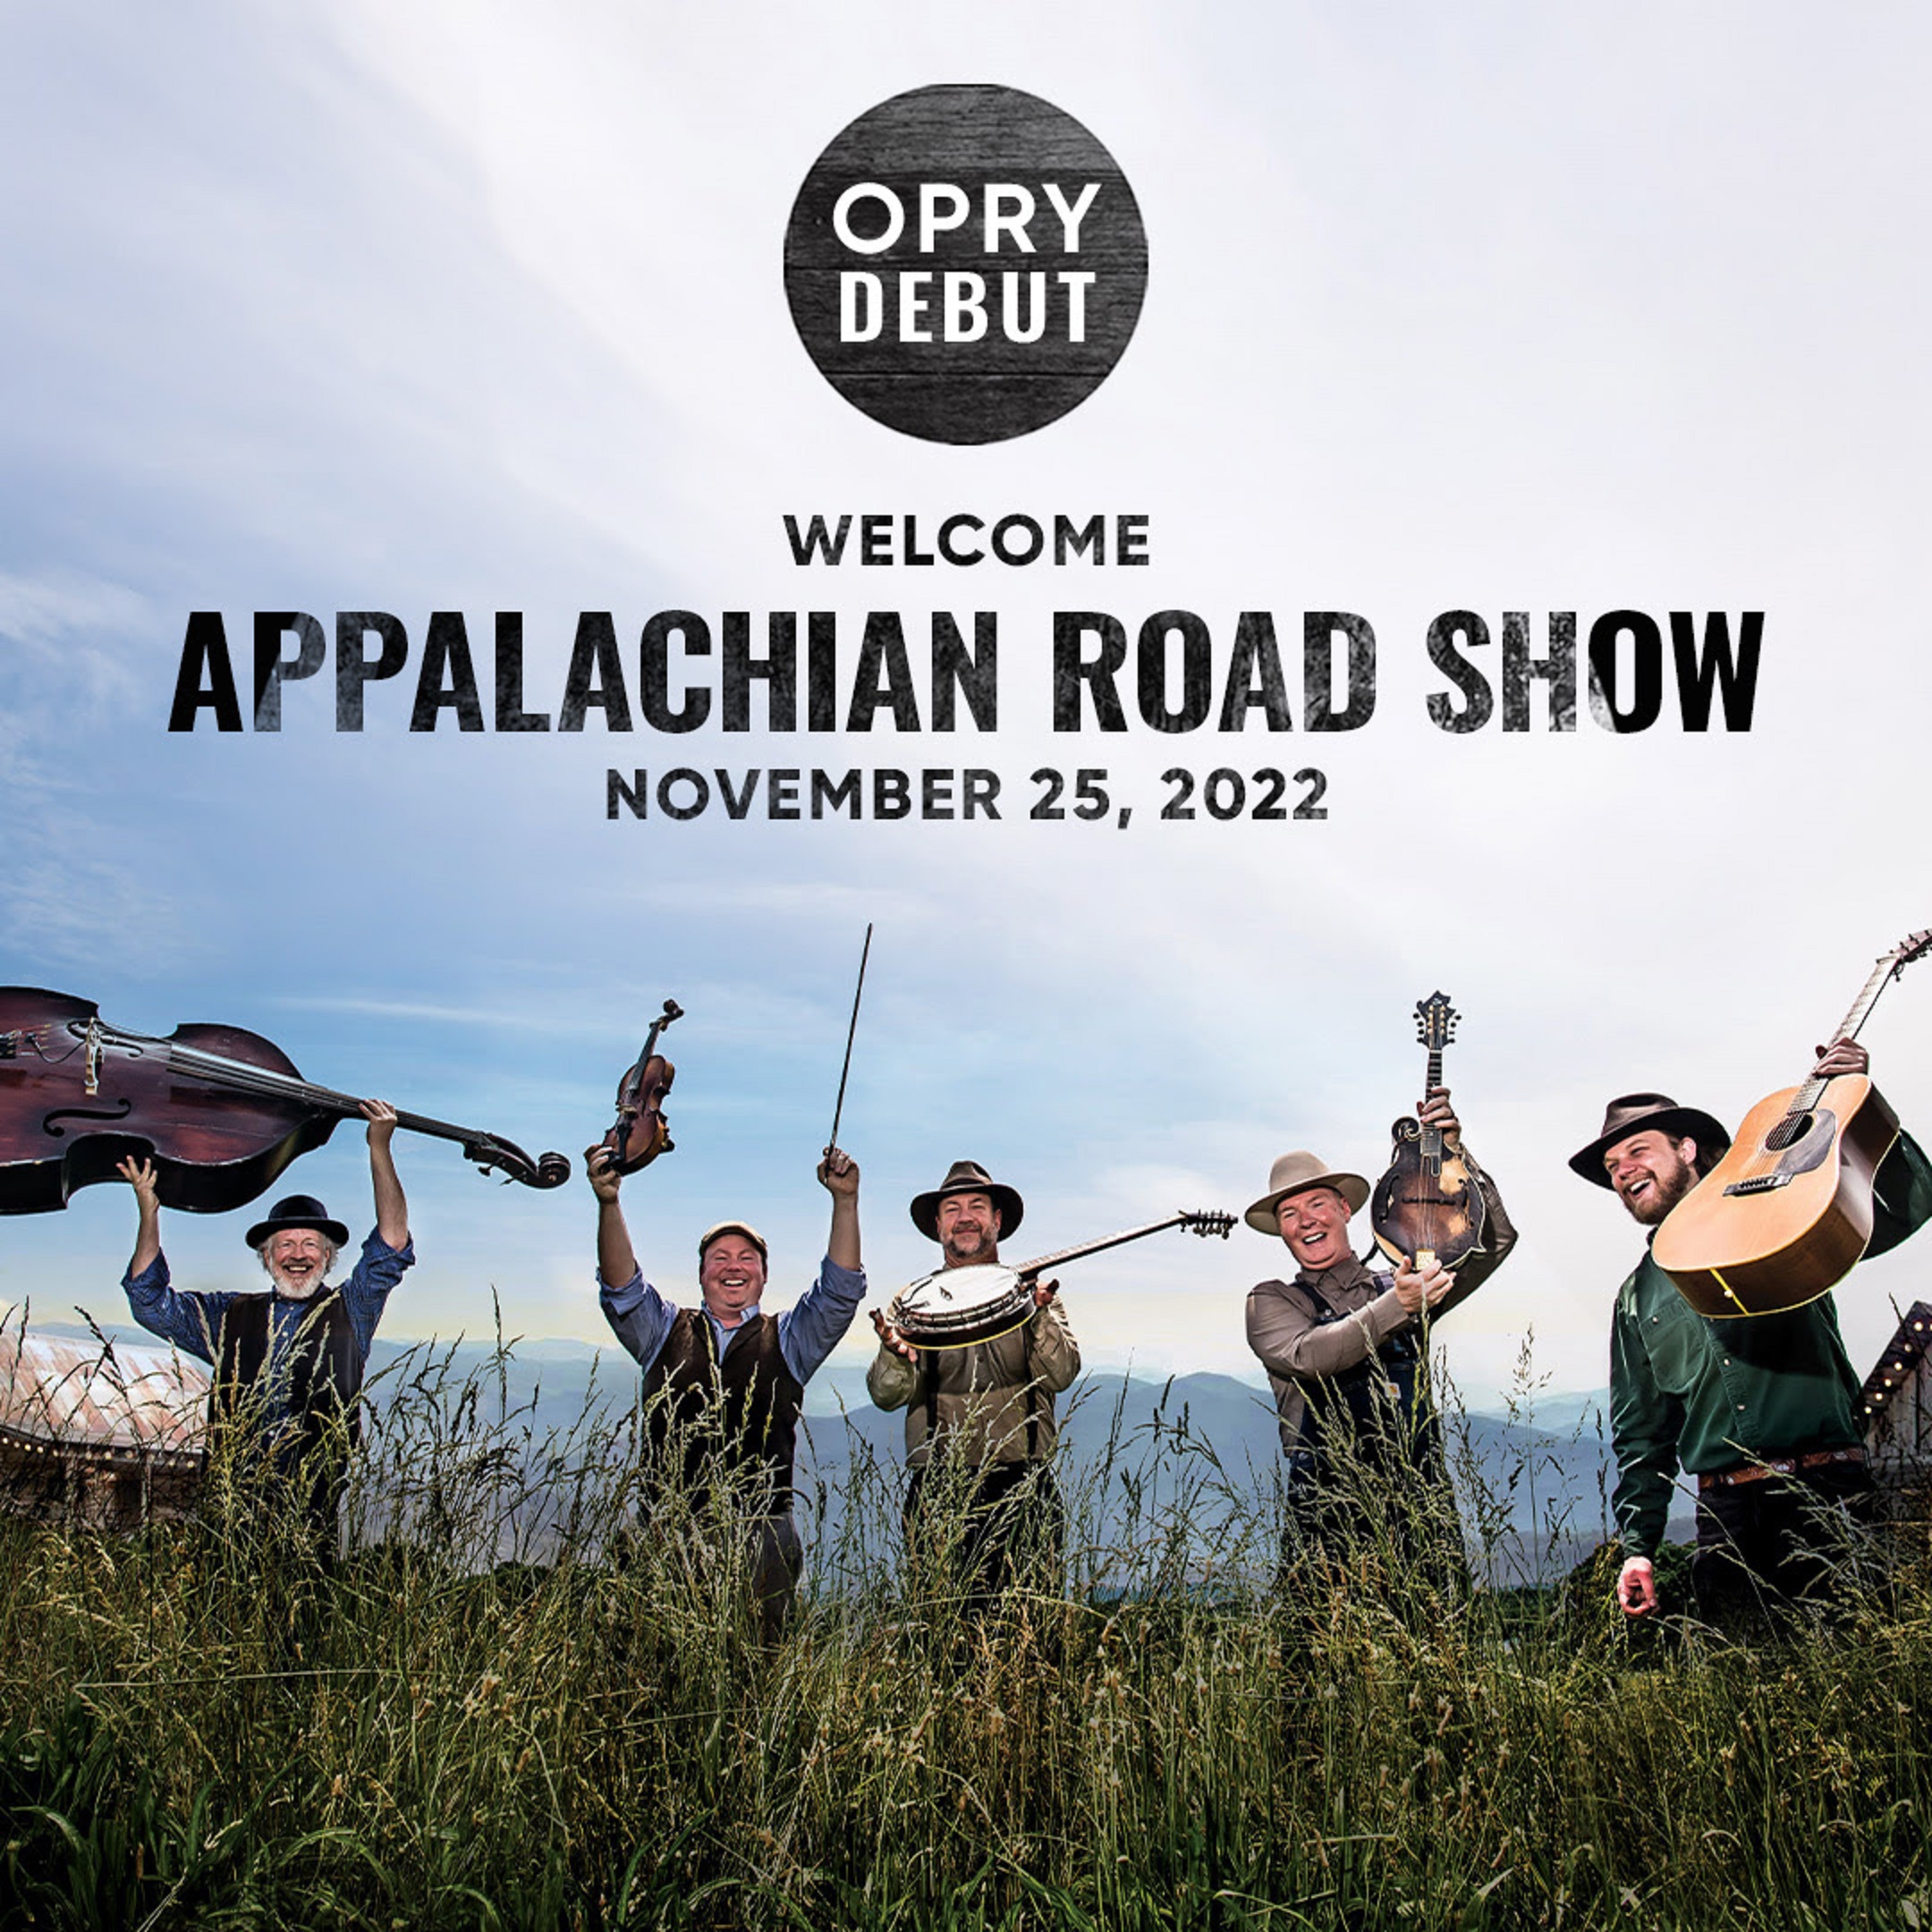 Appalachian Road Show's Opry debut set for 11/25/22